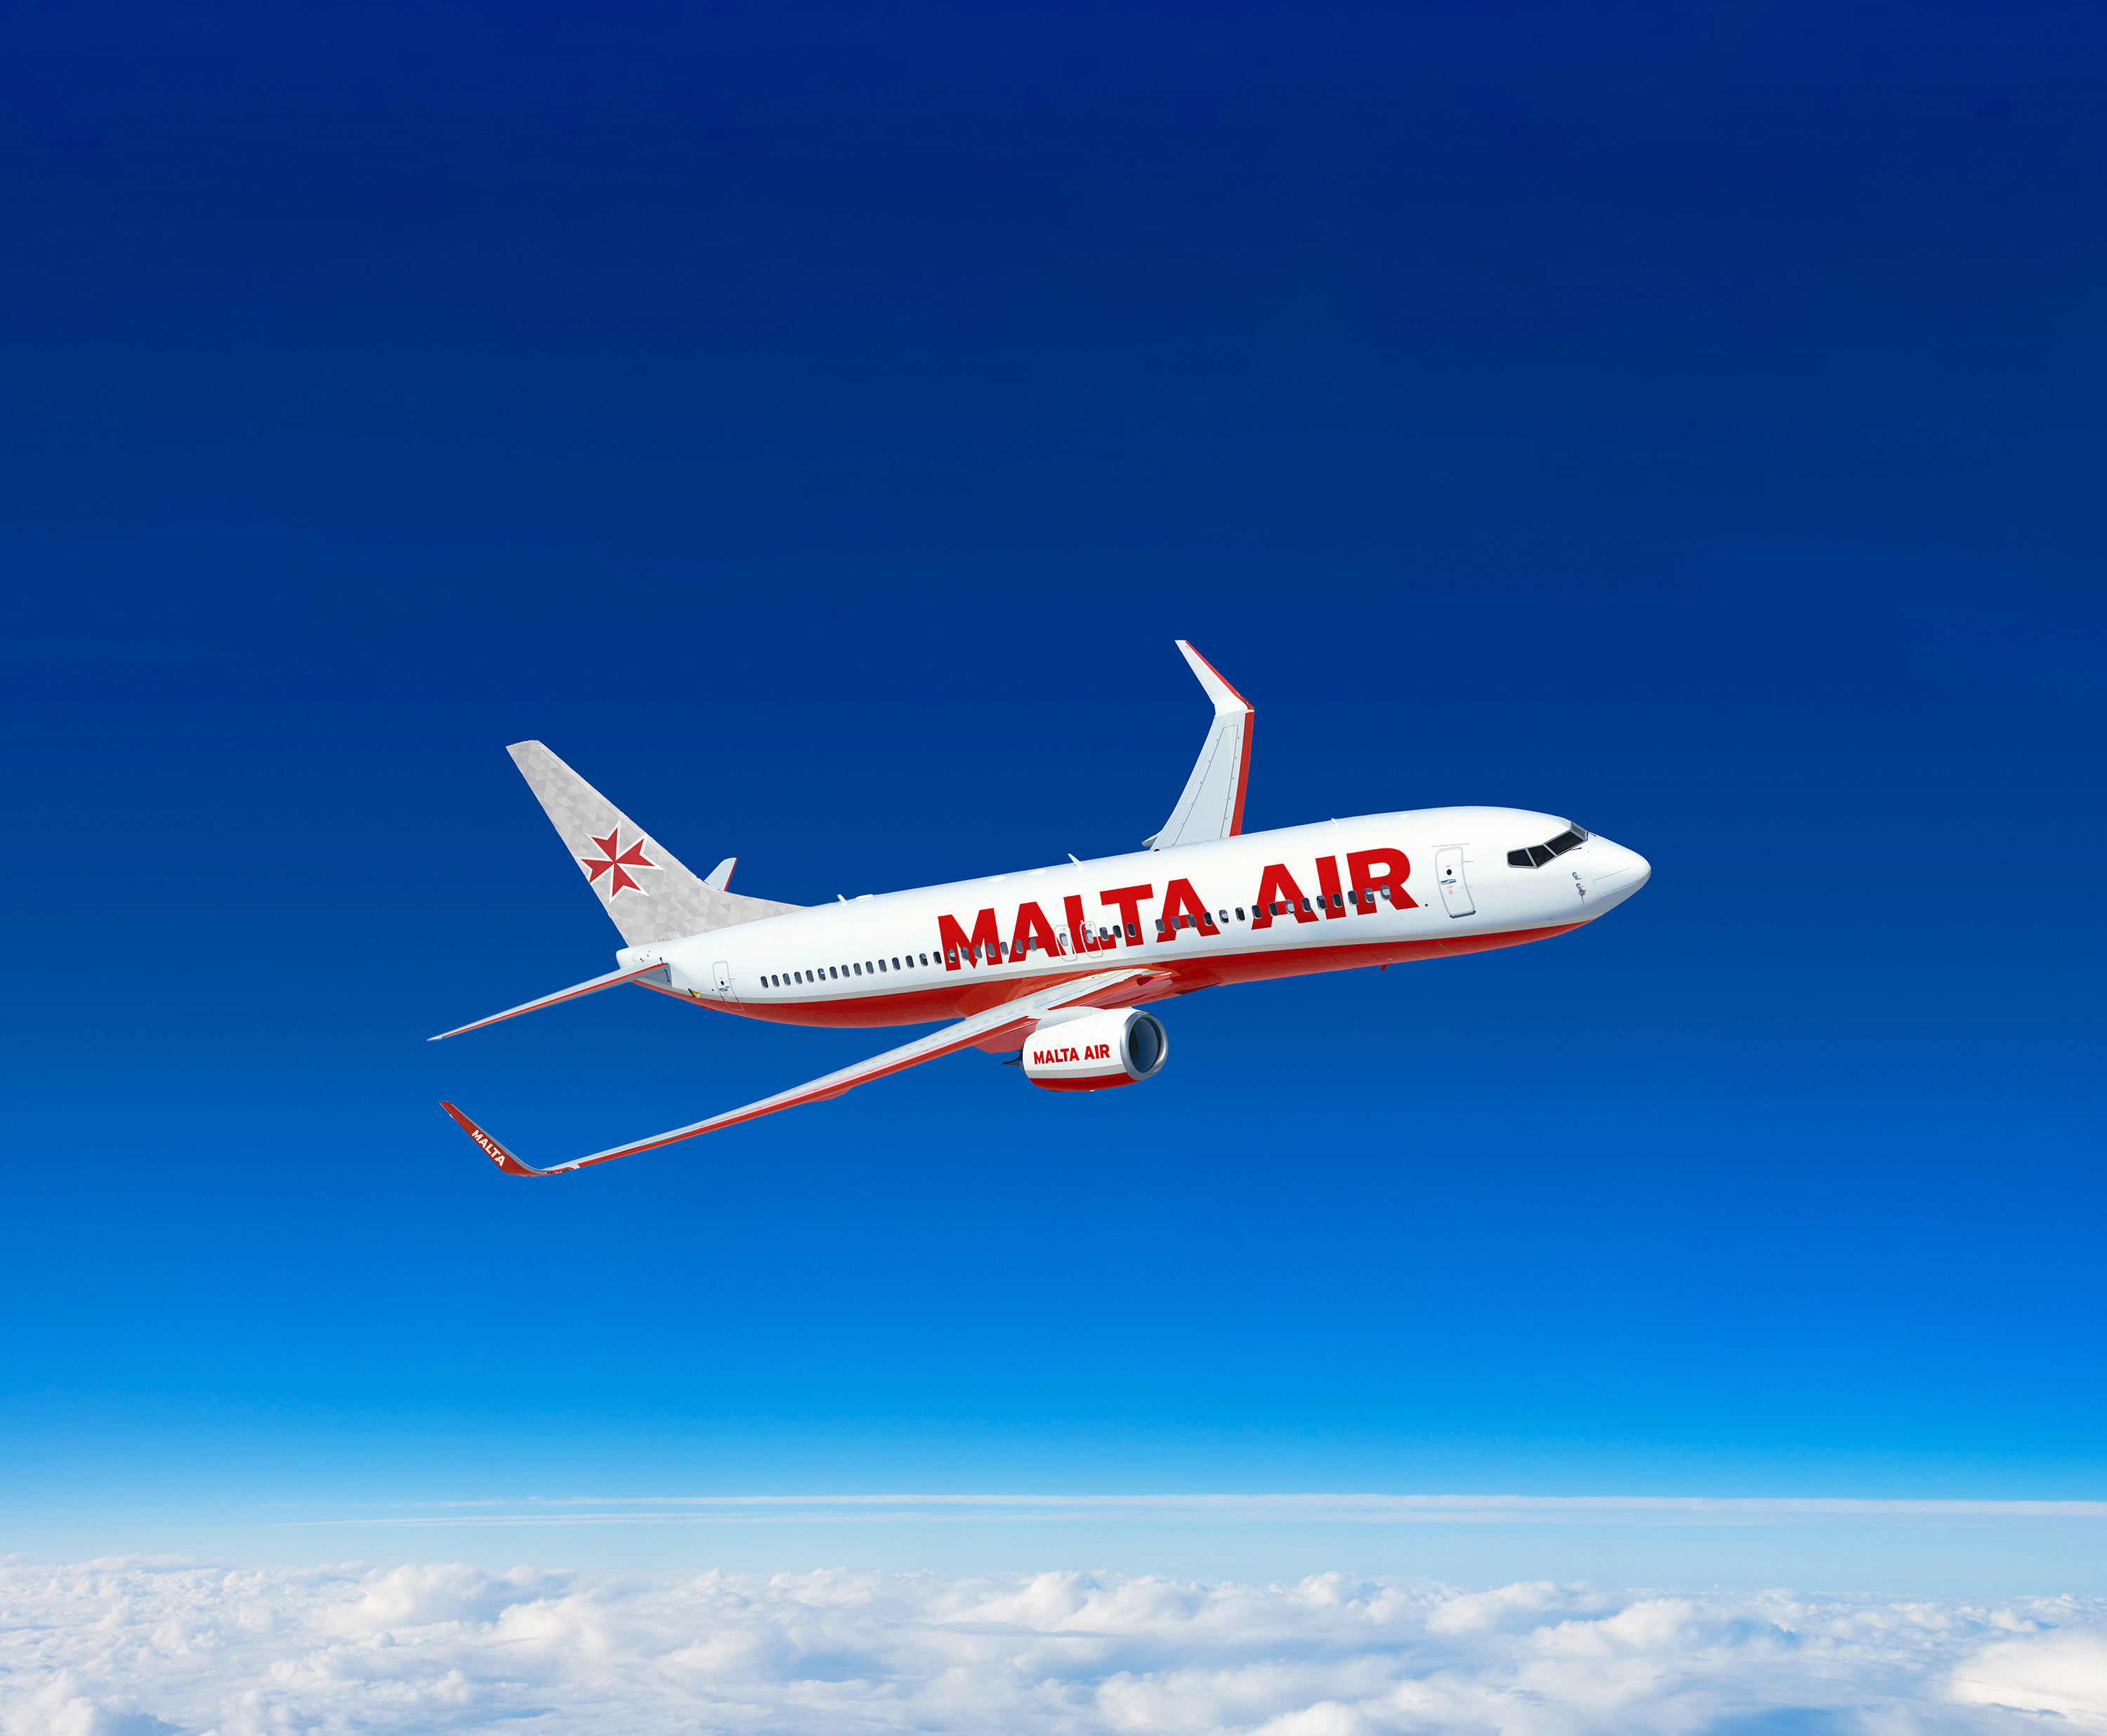 Ryanair Opens 5 New Malta Routes To Italy & Greece  57 Routes To/From Malta For Summer ‘21